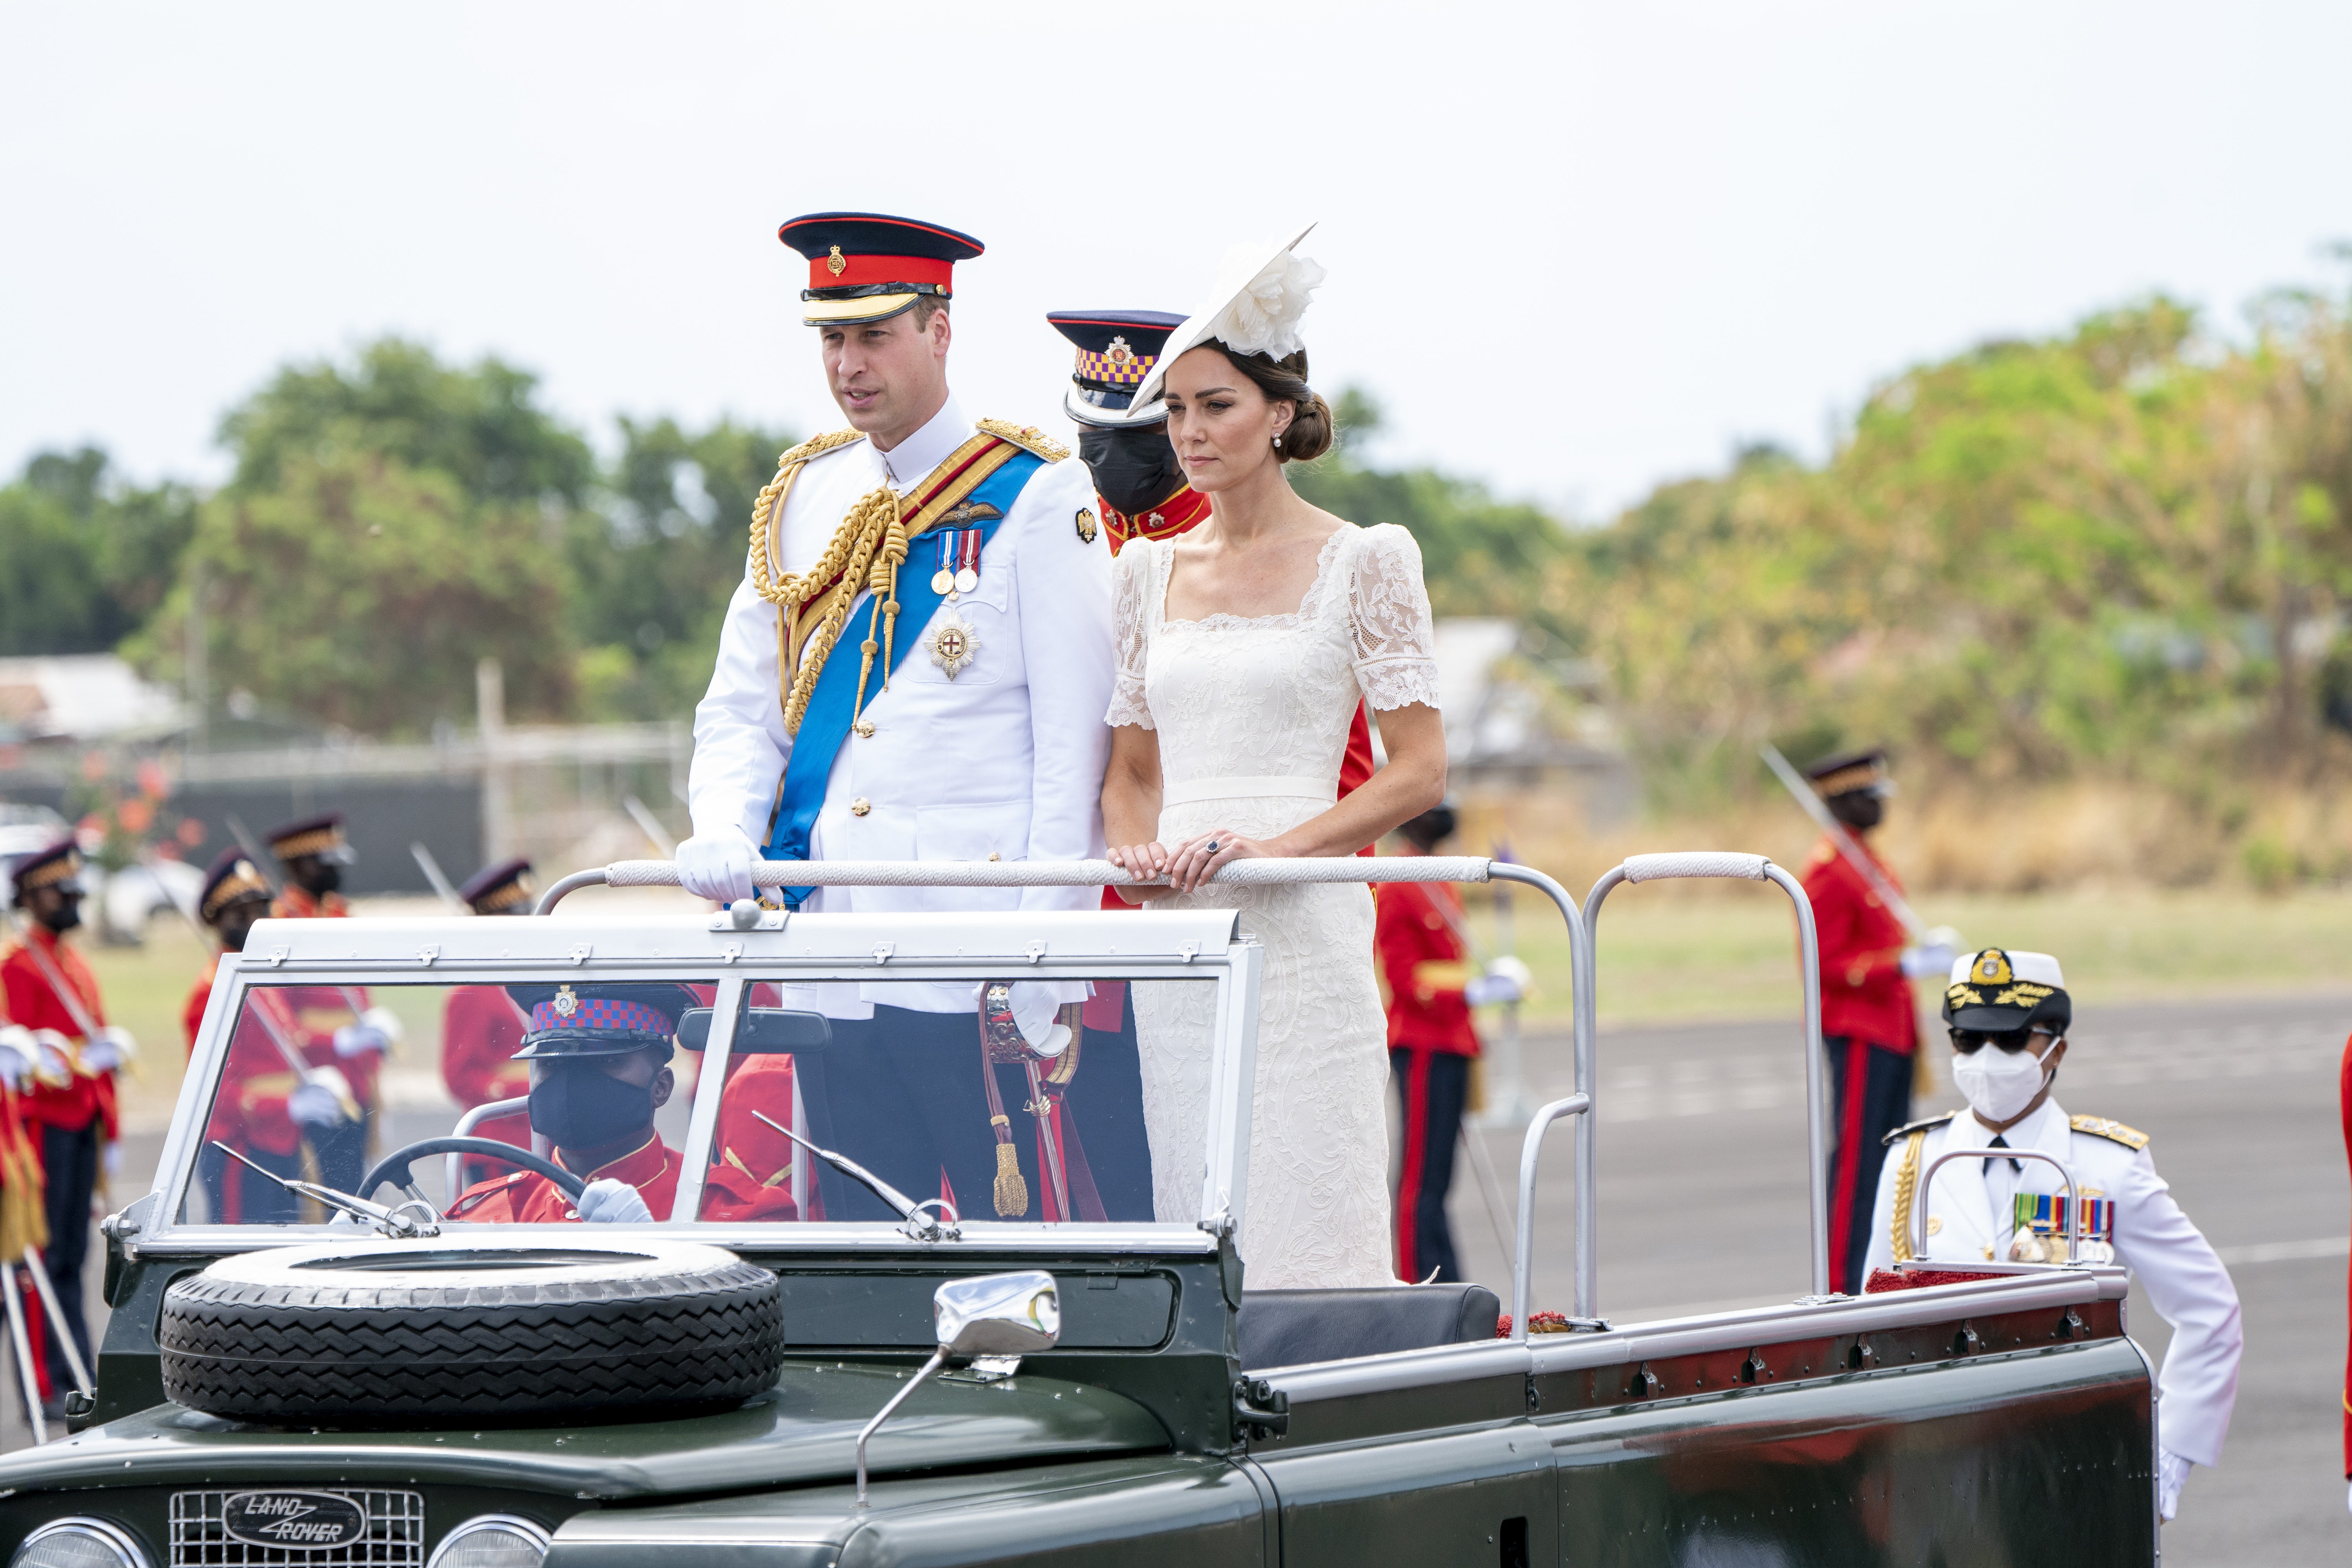 The Duke and Duchess of Cambridge in Kingston, Jamaica, on day six of their tour of the Caribbean on behalf of the Queen to mark her Platinum Jubilee(Jane Barlow/PA)